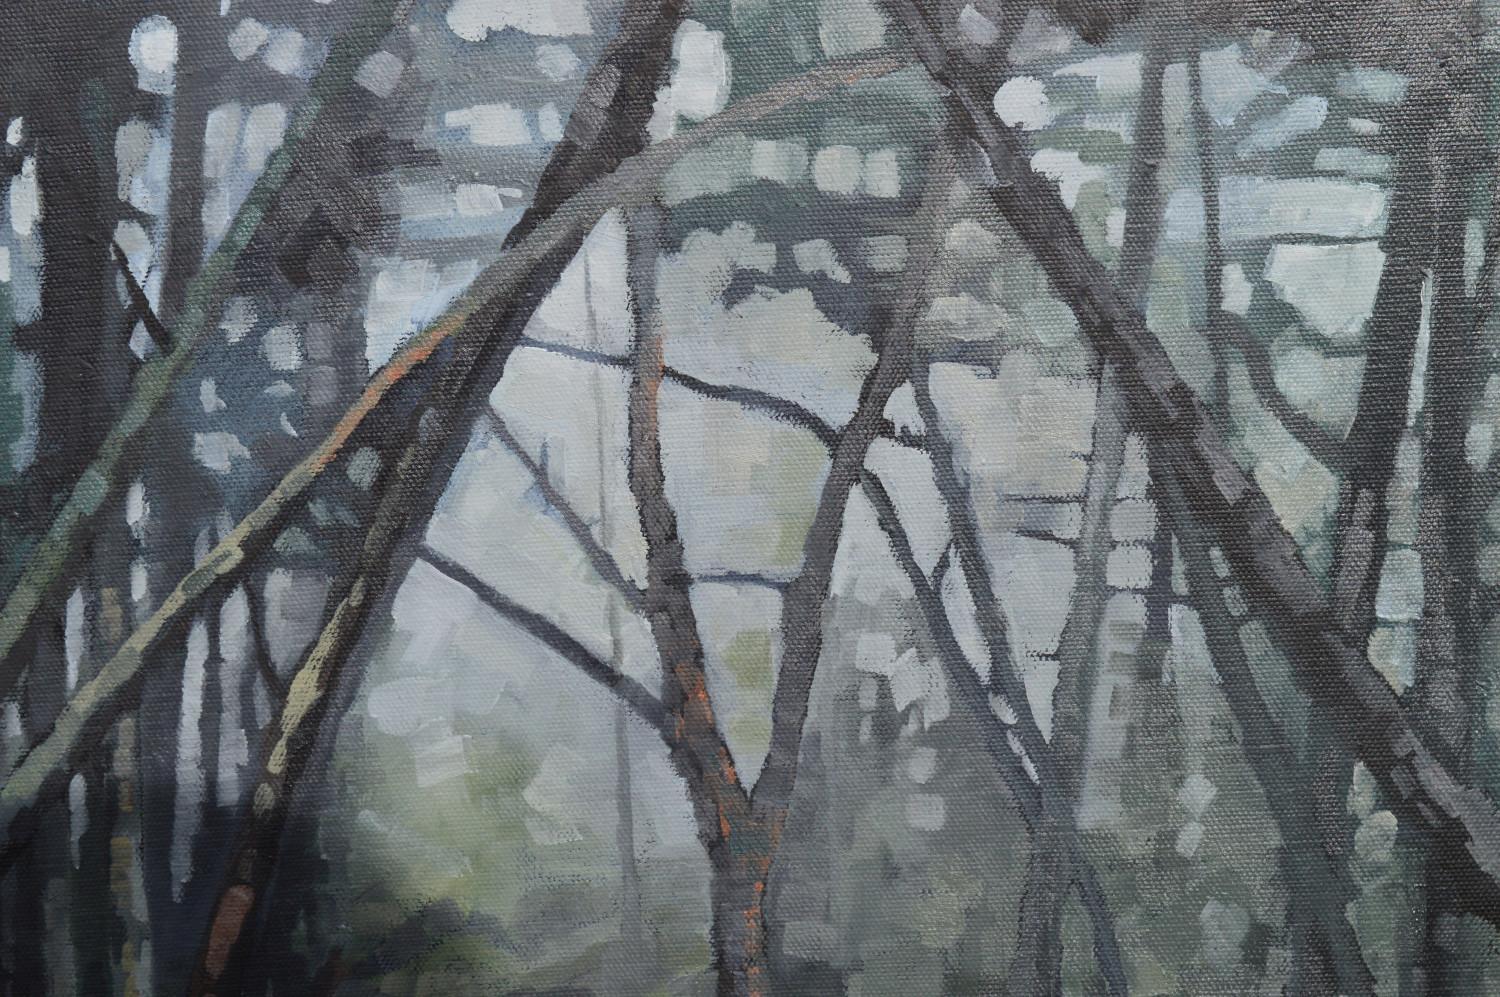 <p>Artist Comments<br>Inspired by memory and photos taken on a hiking trip, artist David Thelen captures the woodland's moody atmosphere. Barren trees loom along the rocky trail, while the fog shrouds the distant path. The muted palette infuses the